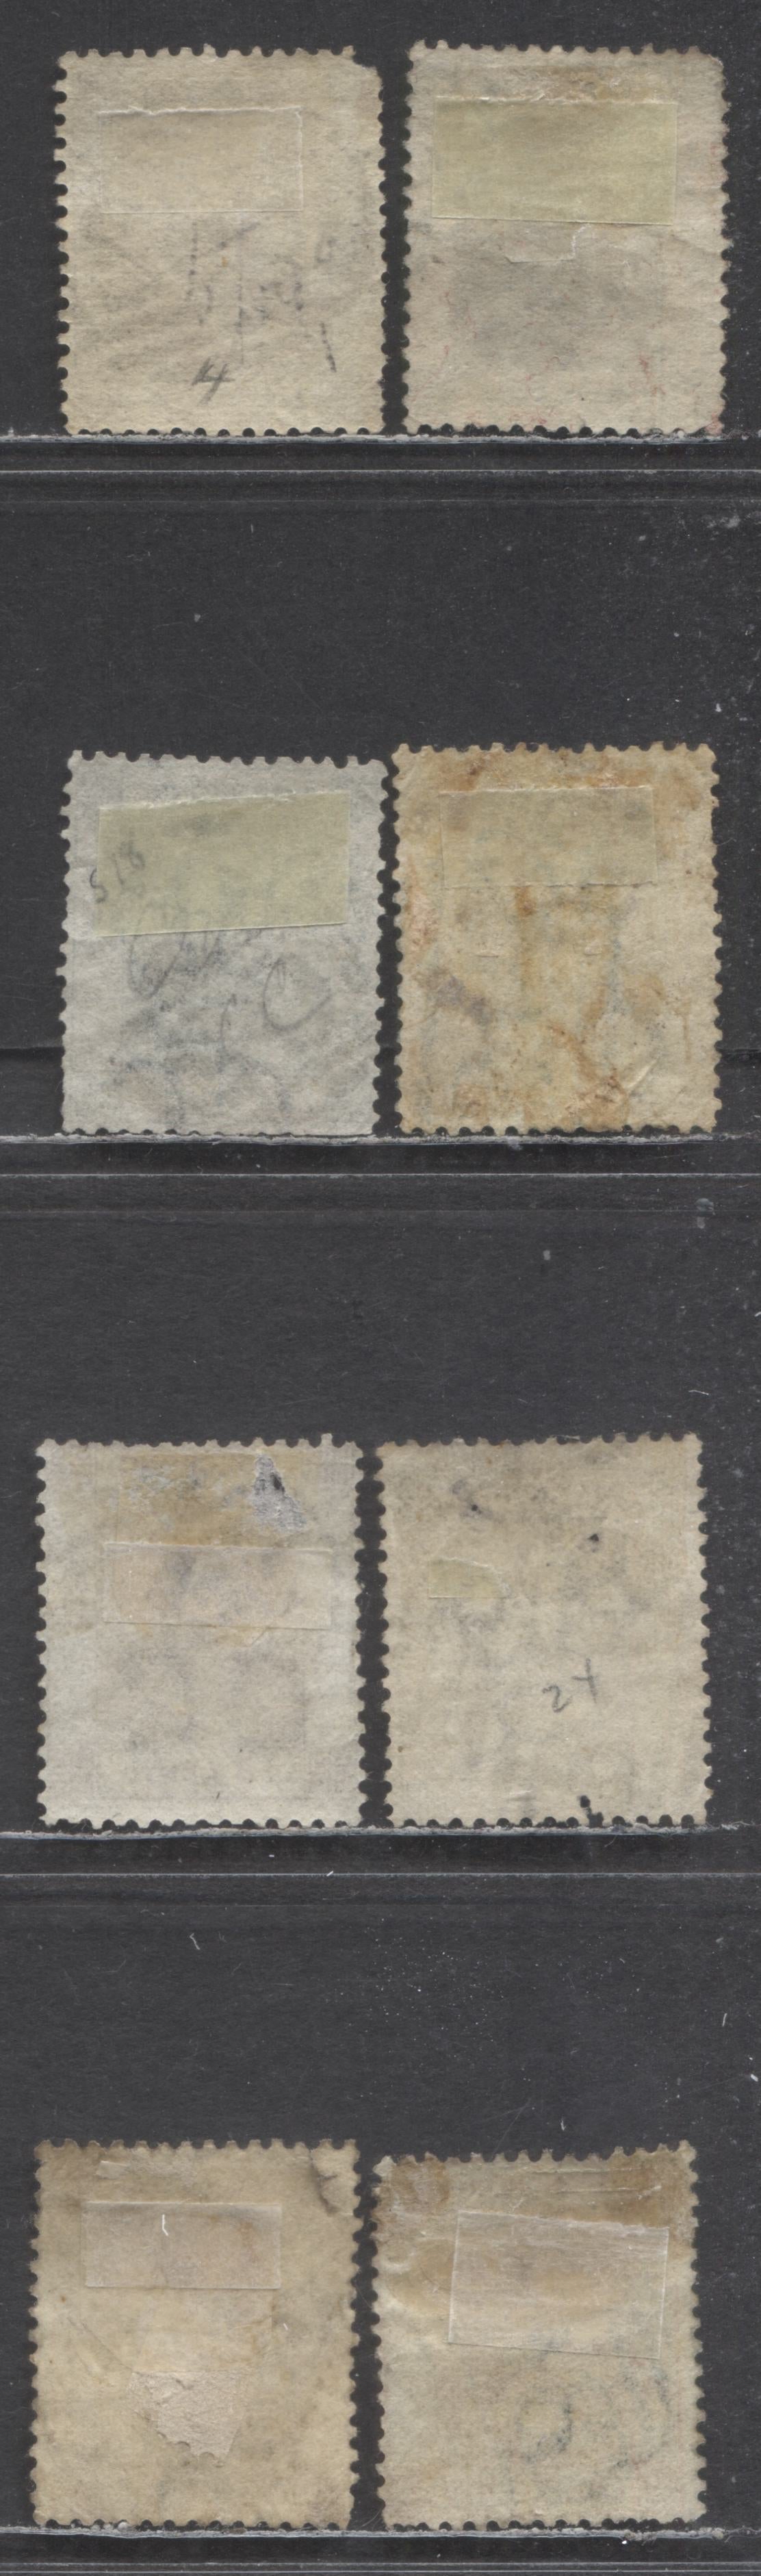 Lot 68 Hong Kong SC#3/24 1862-1880 Queen Victoria Issue, Unwatermarked & Crown CC Wmk, 8 Ungraded Singles, Click on Listing to See ALL Pictures, Estimated Value $10